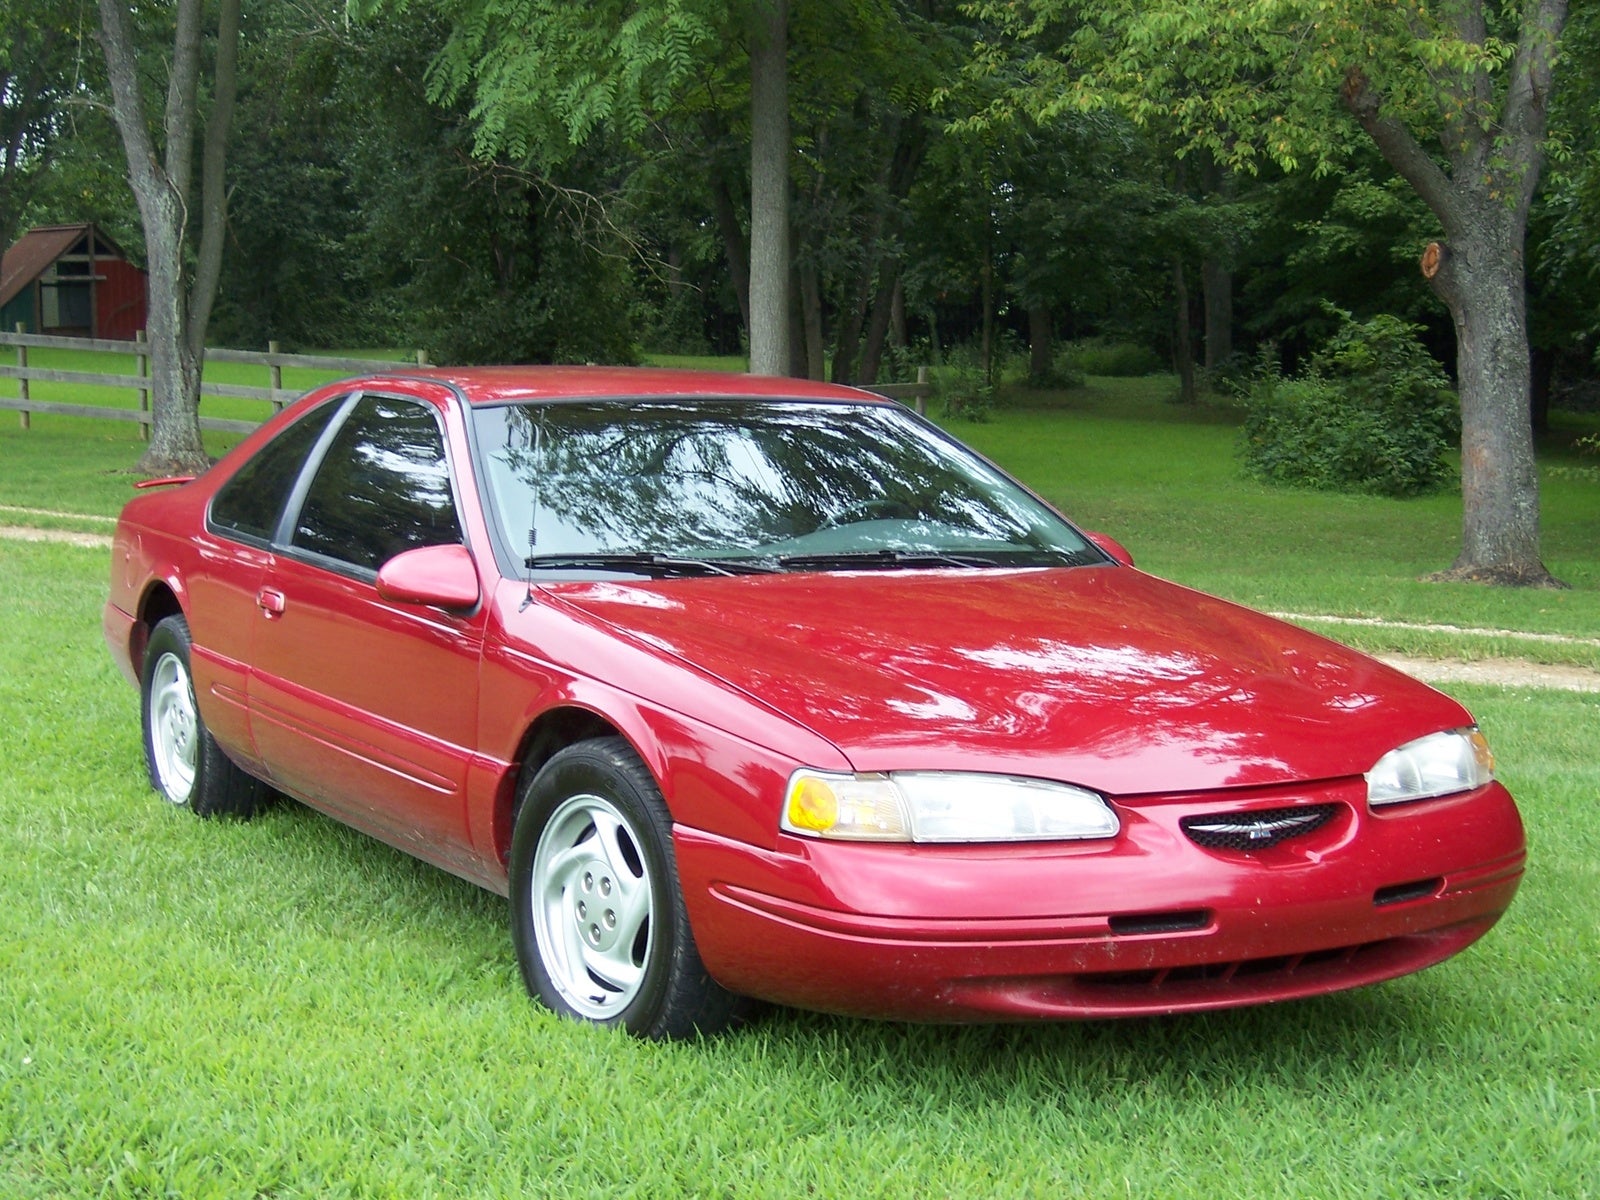 1996_ford_thunderbird_2_dr_lx_coupe-pic-16129.jpeg